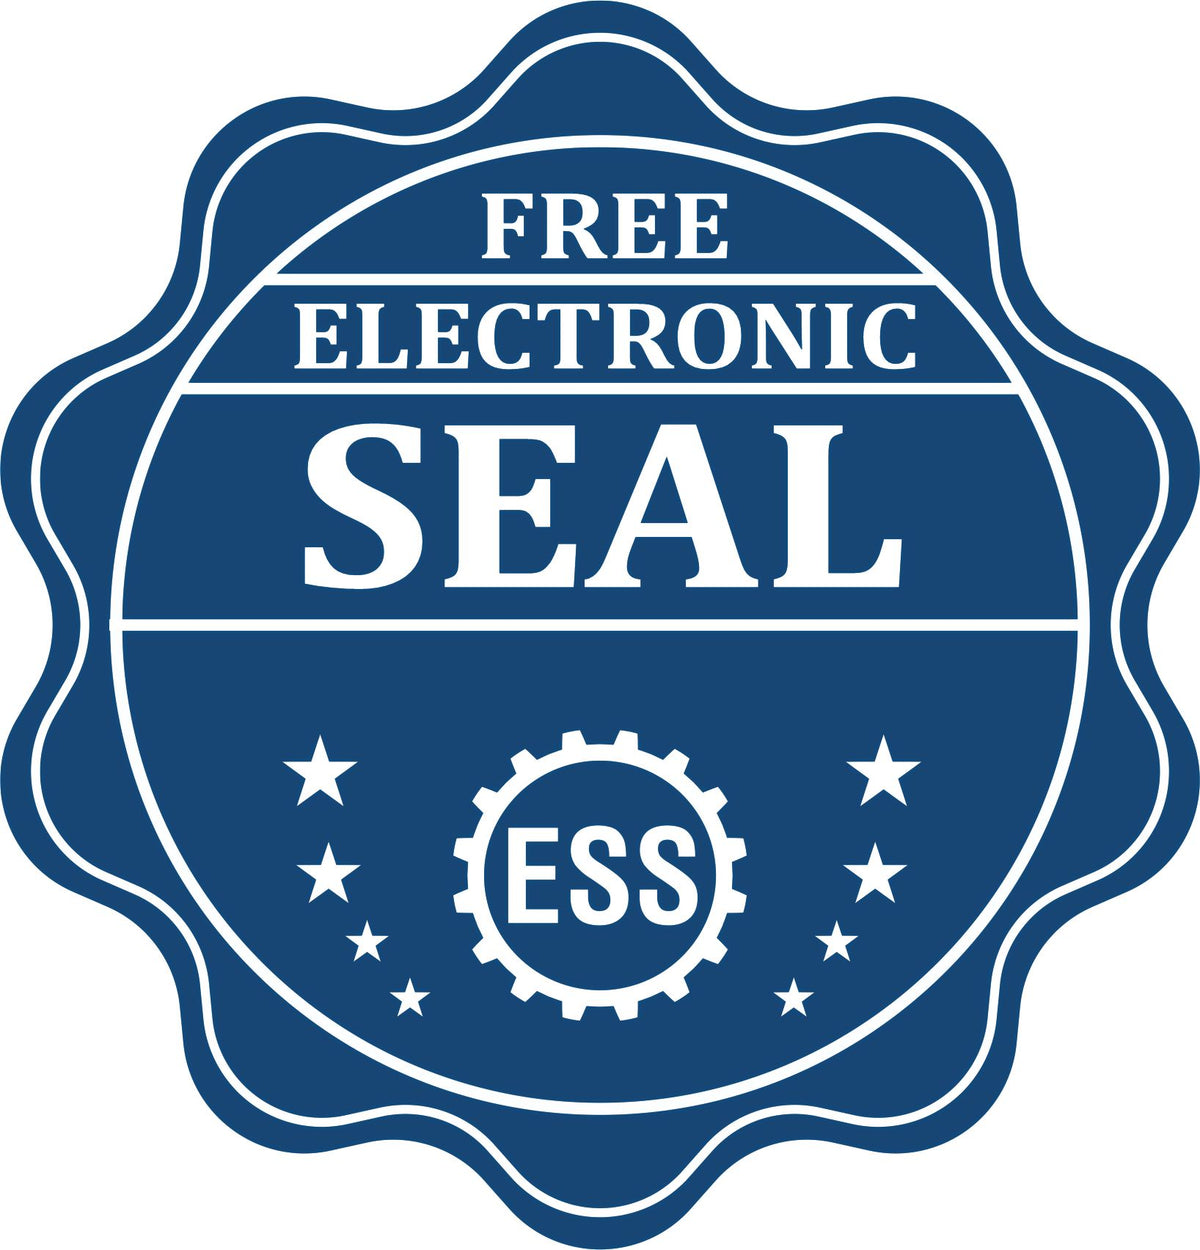 A badge showing a free electronic seal for the Soft Nebraska Professional Geologist Seal with stars and the ESS gear on the emblem.